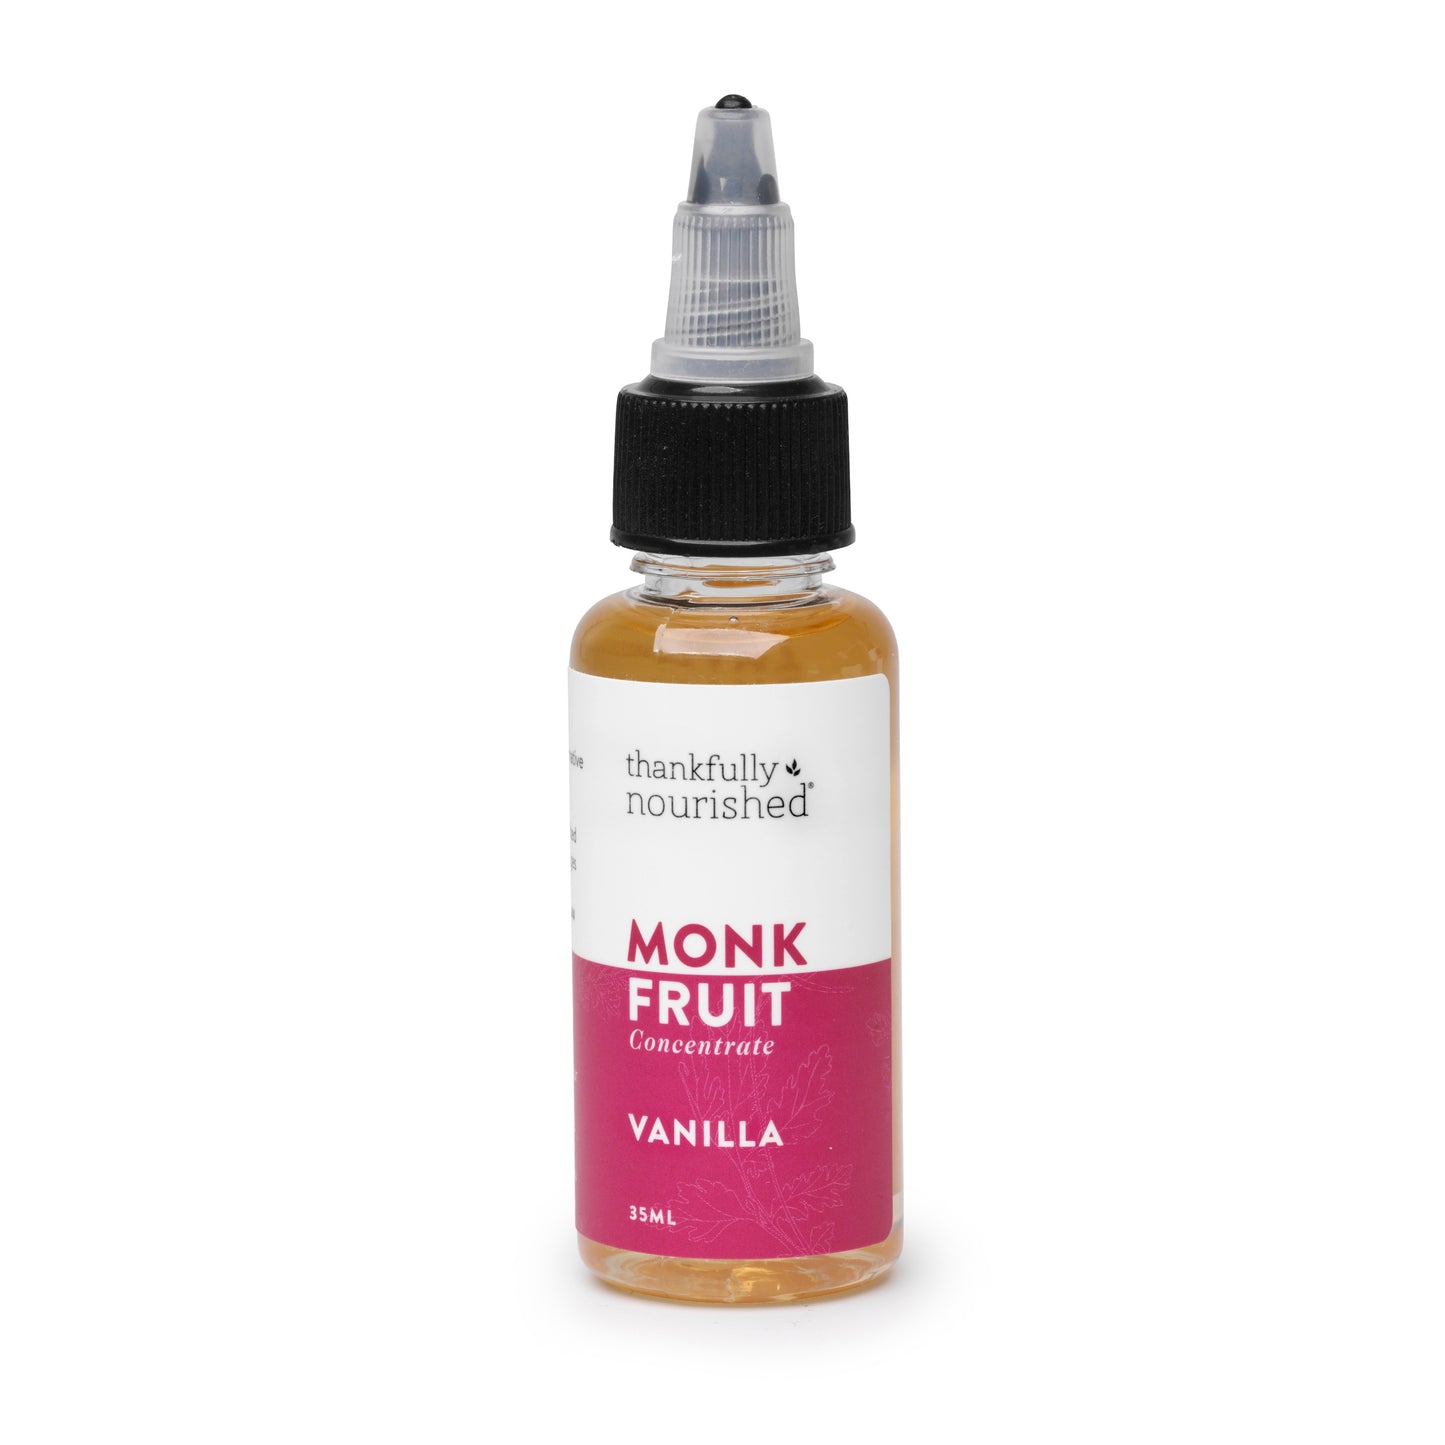 Thankfully Nourished Monk Fruit Concentrate 35ml, Vanilla Flavour